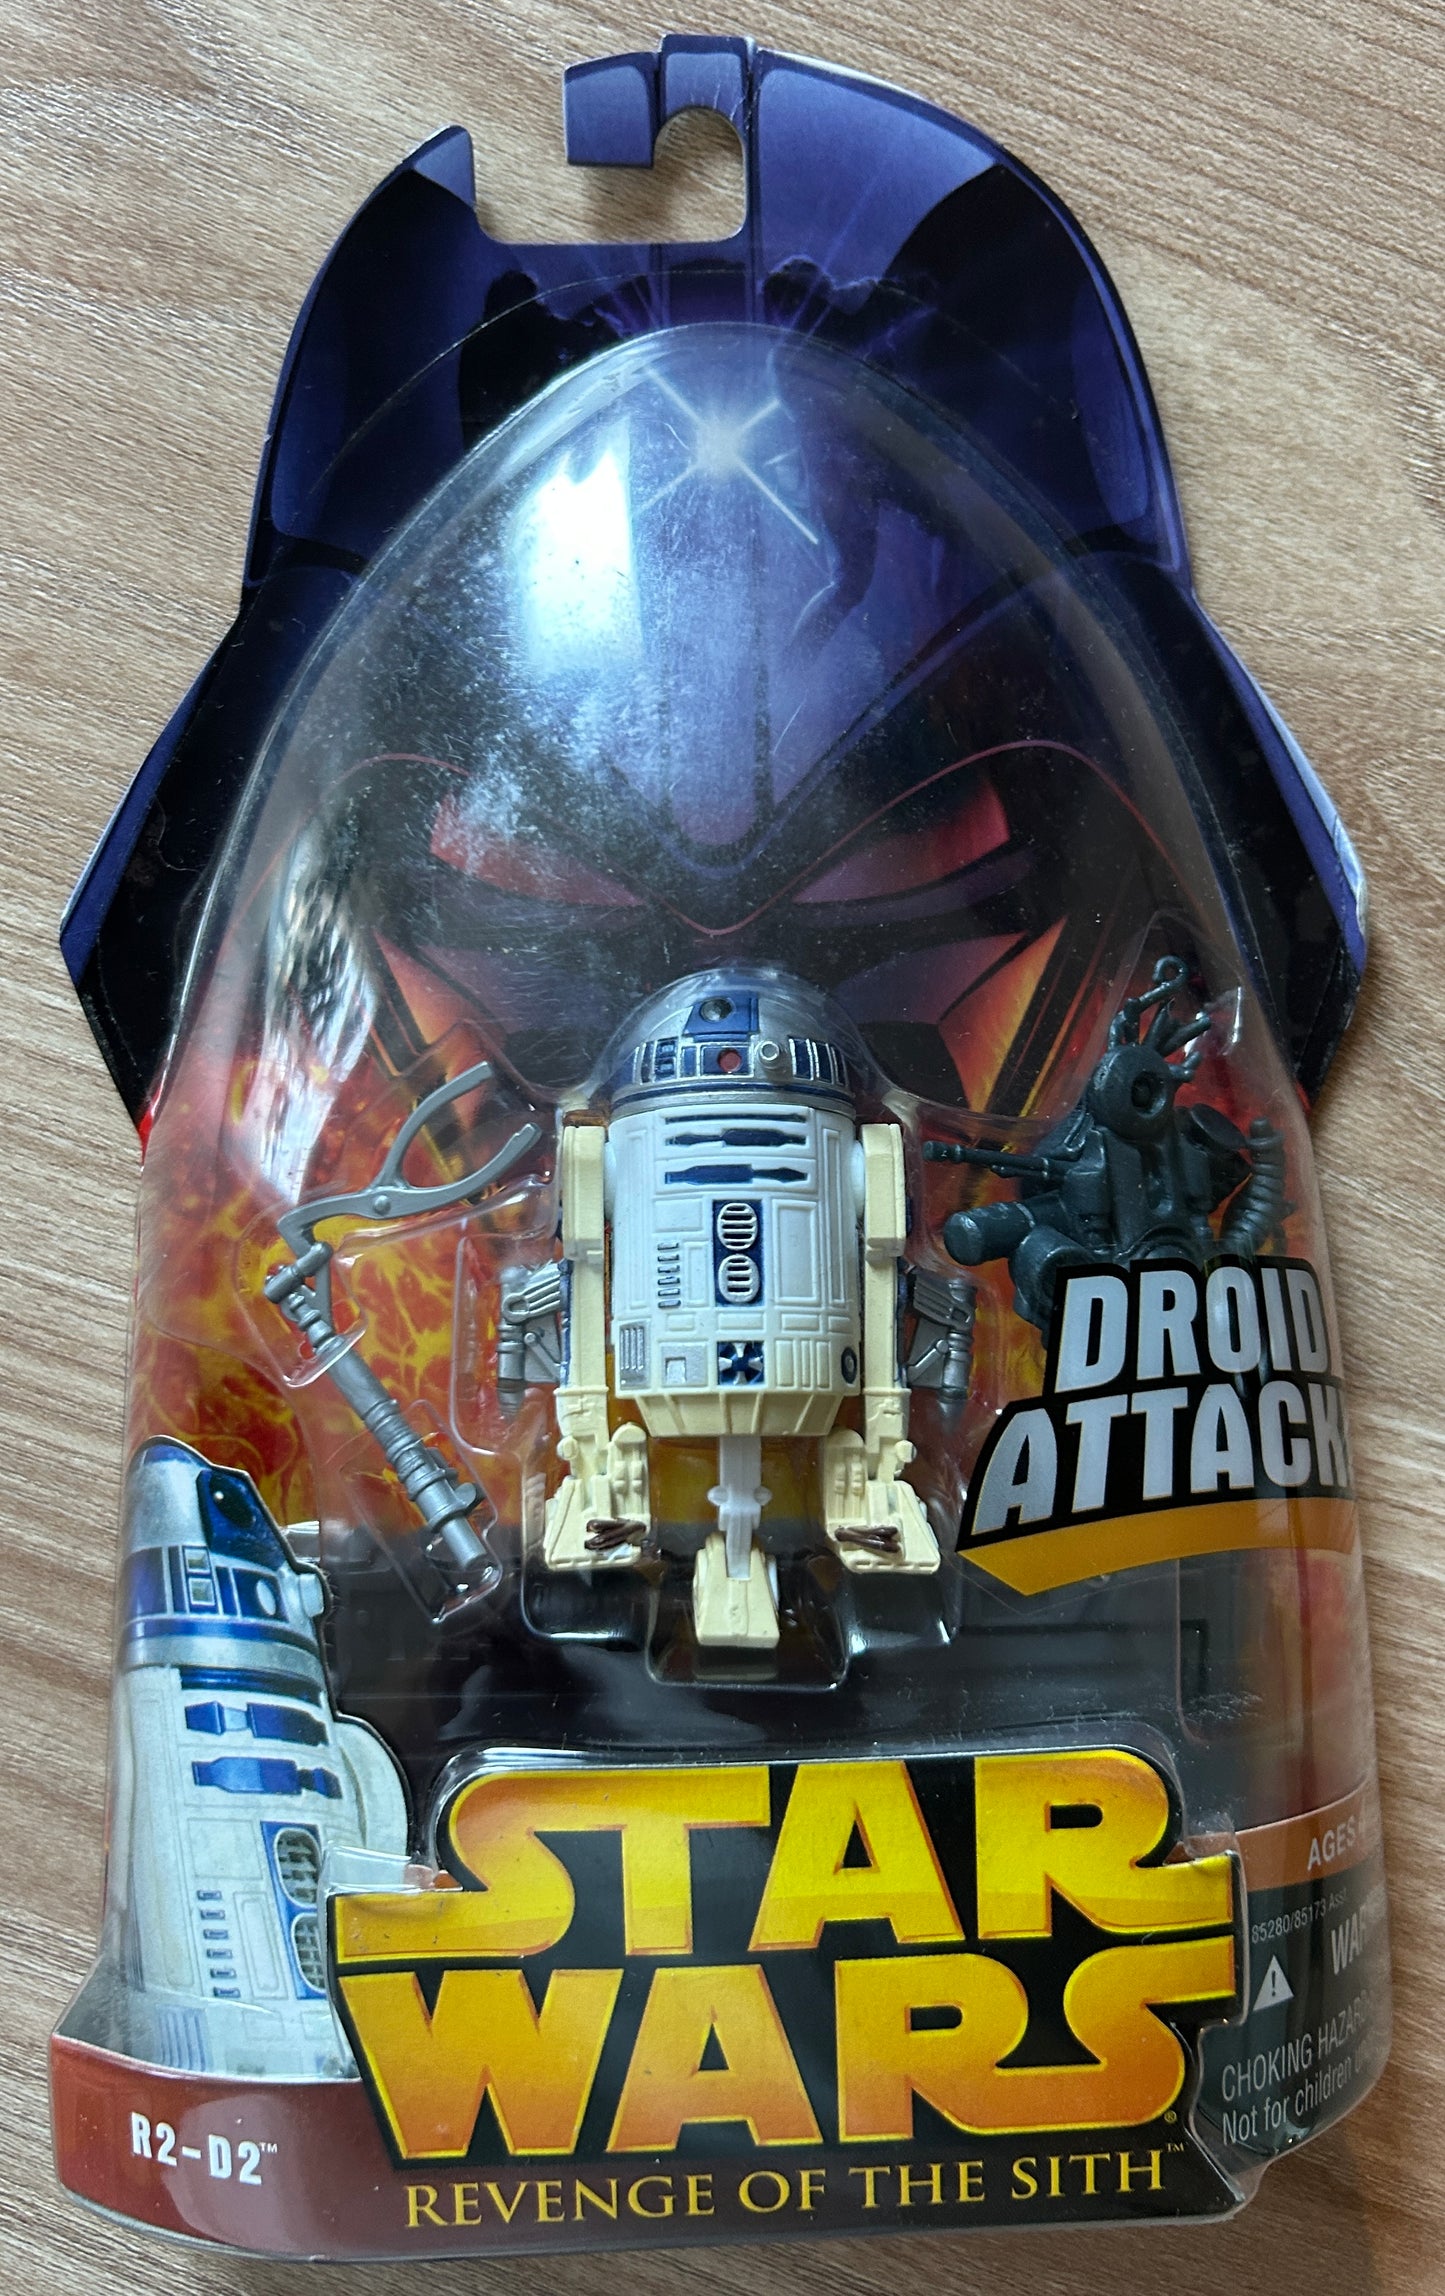 STAR WARS - Revenge of the Sith ROTS - Figurine R2-D2